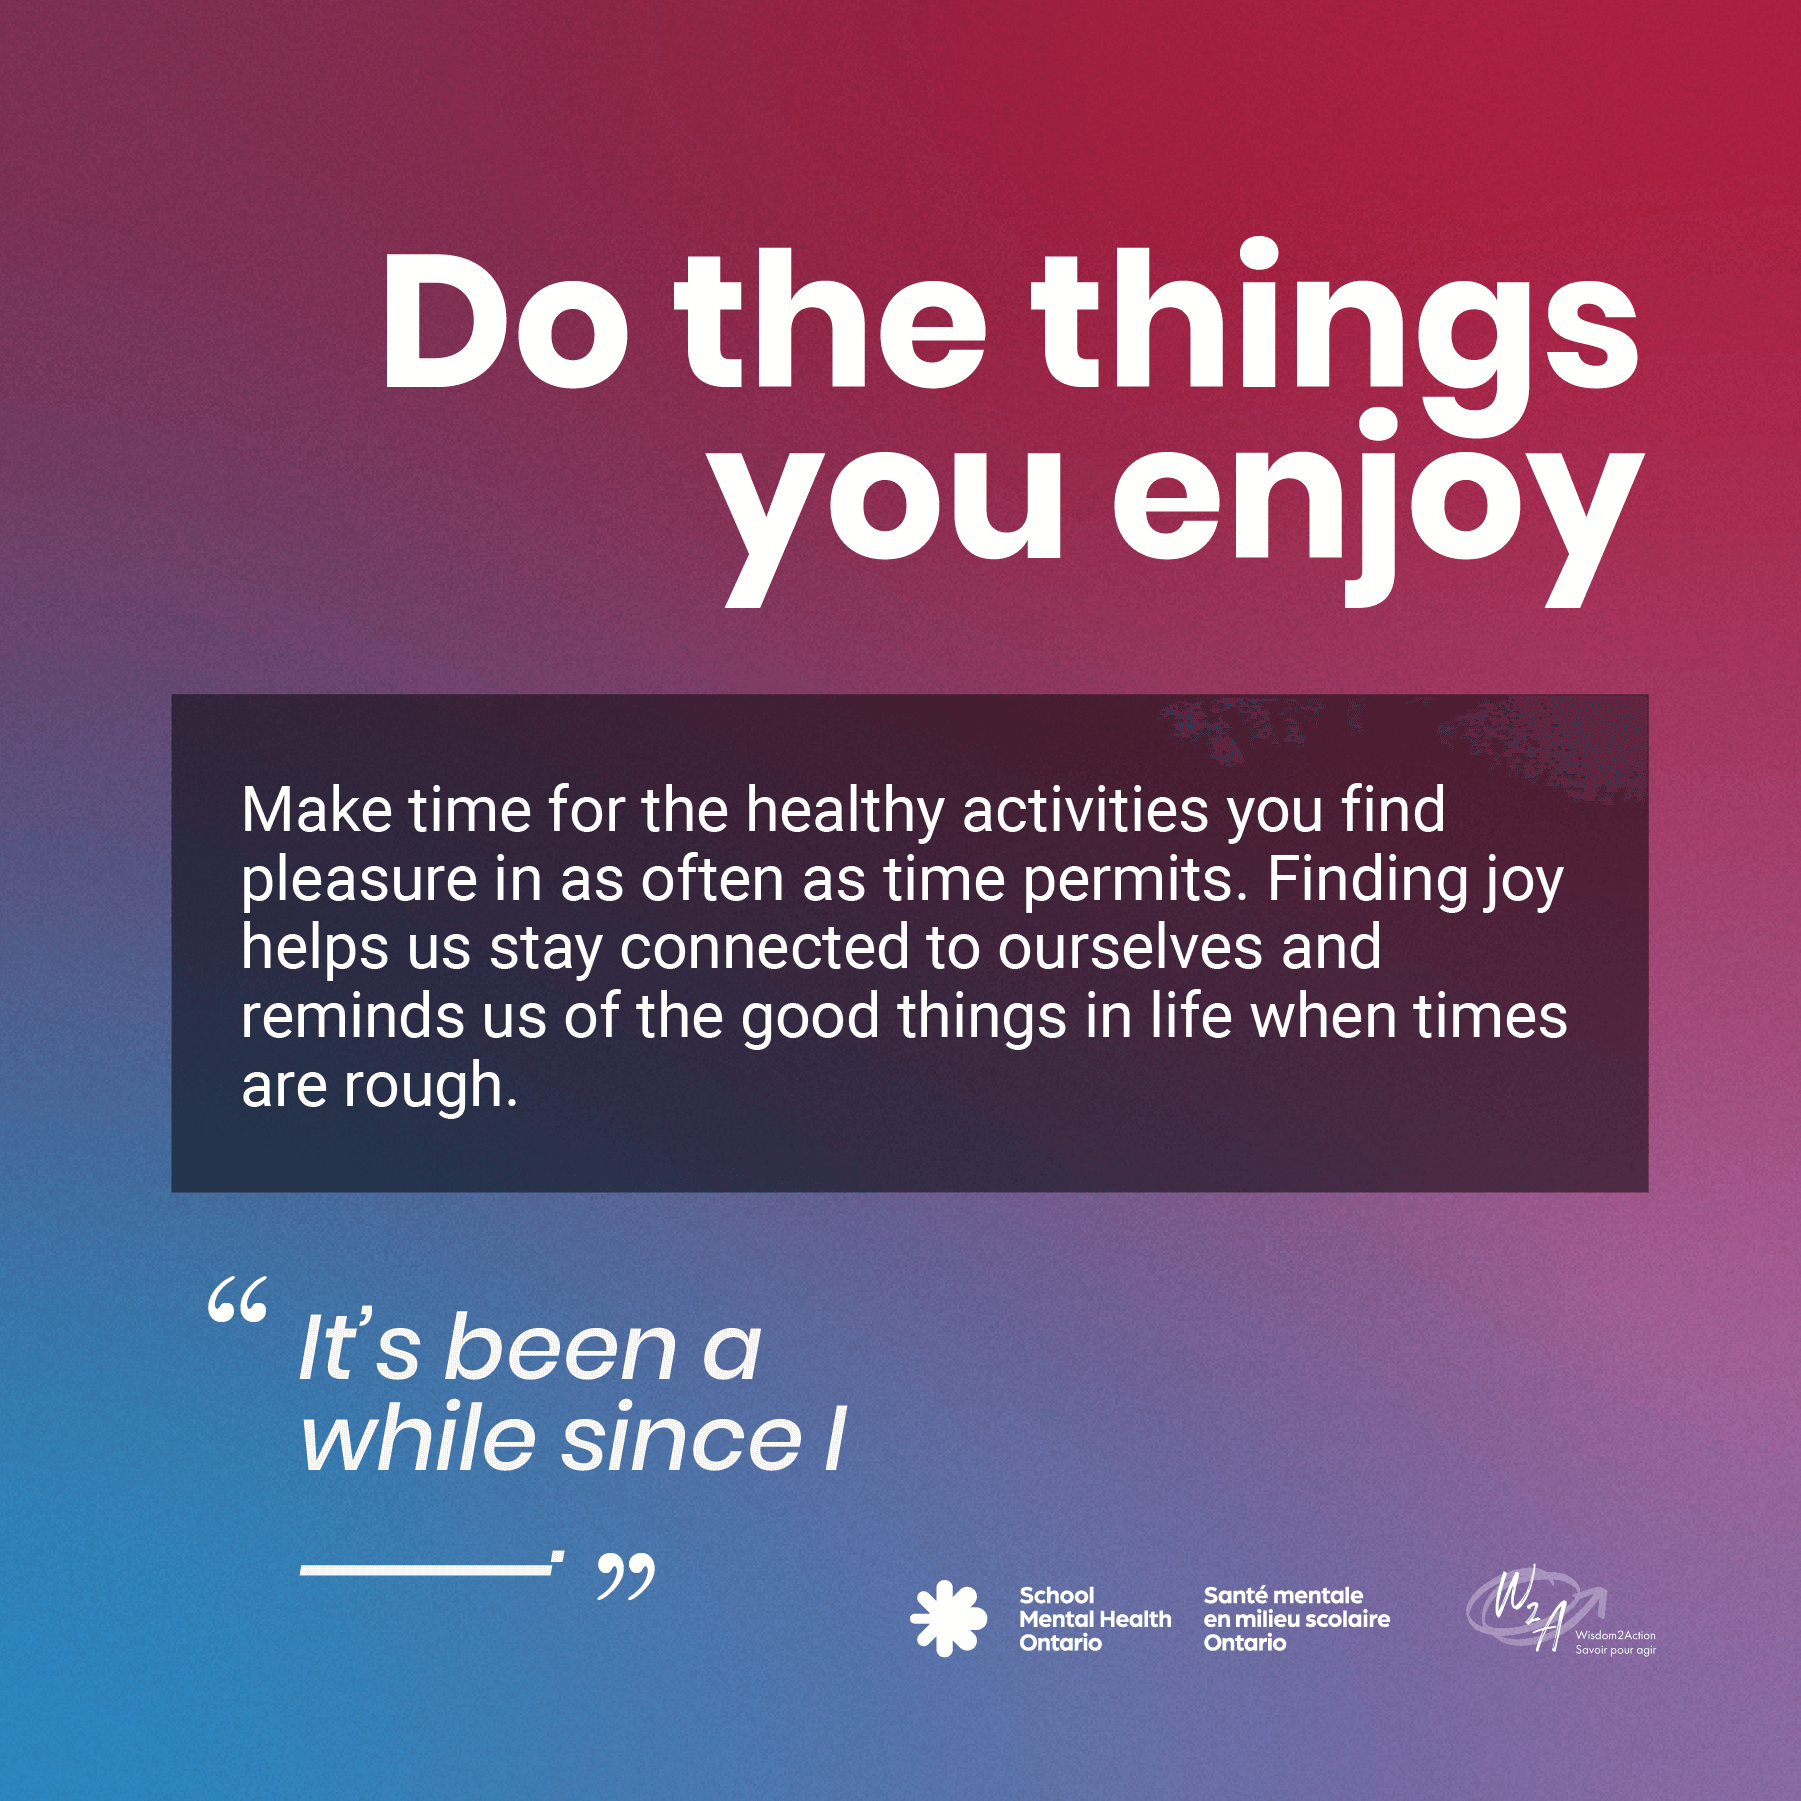 Do the things you enjoy - see full description of image below.